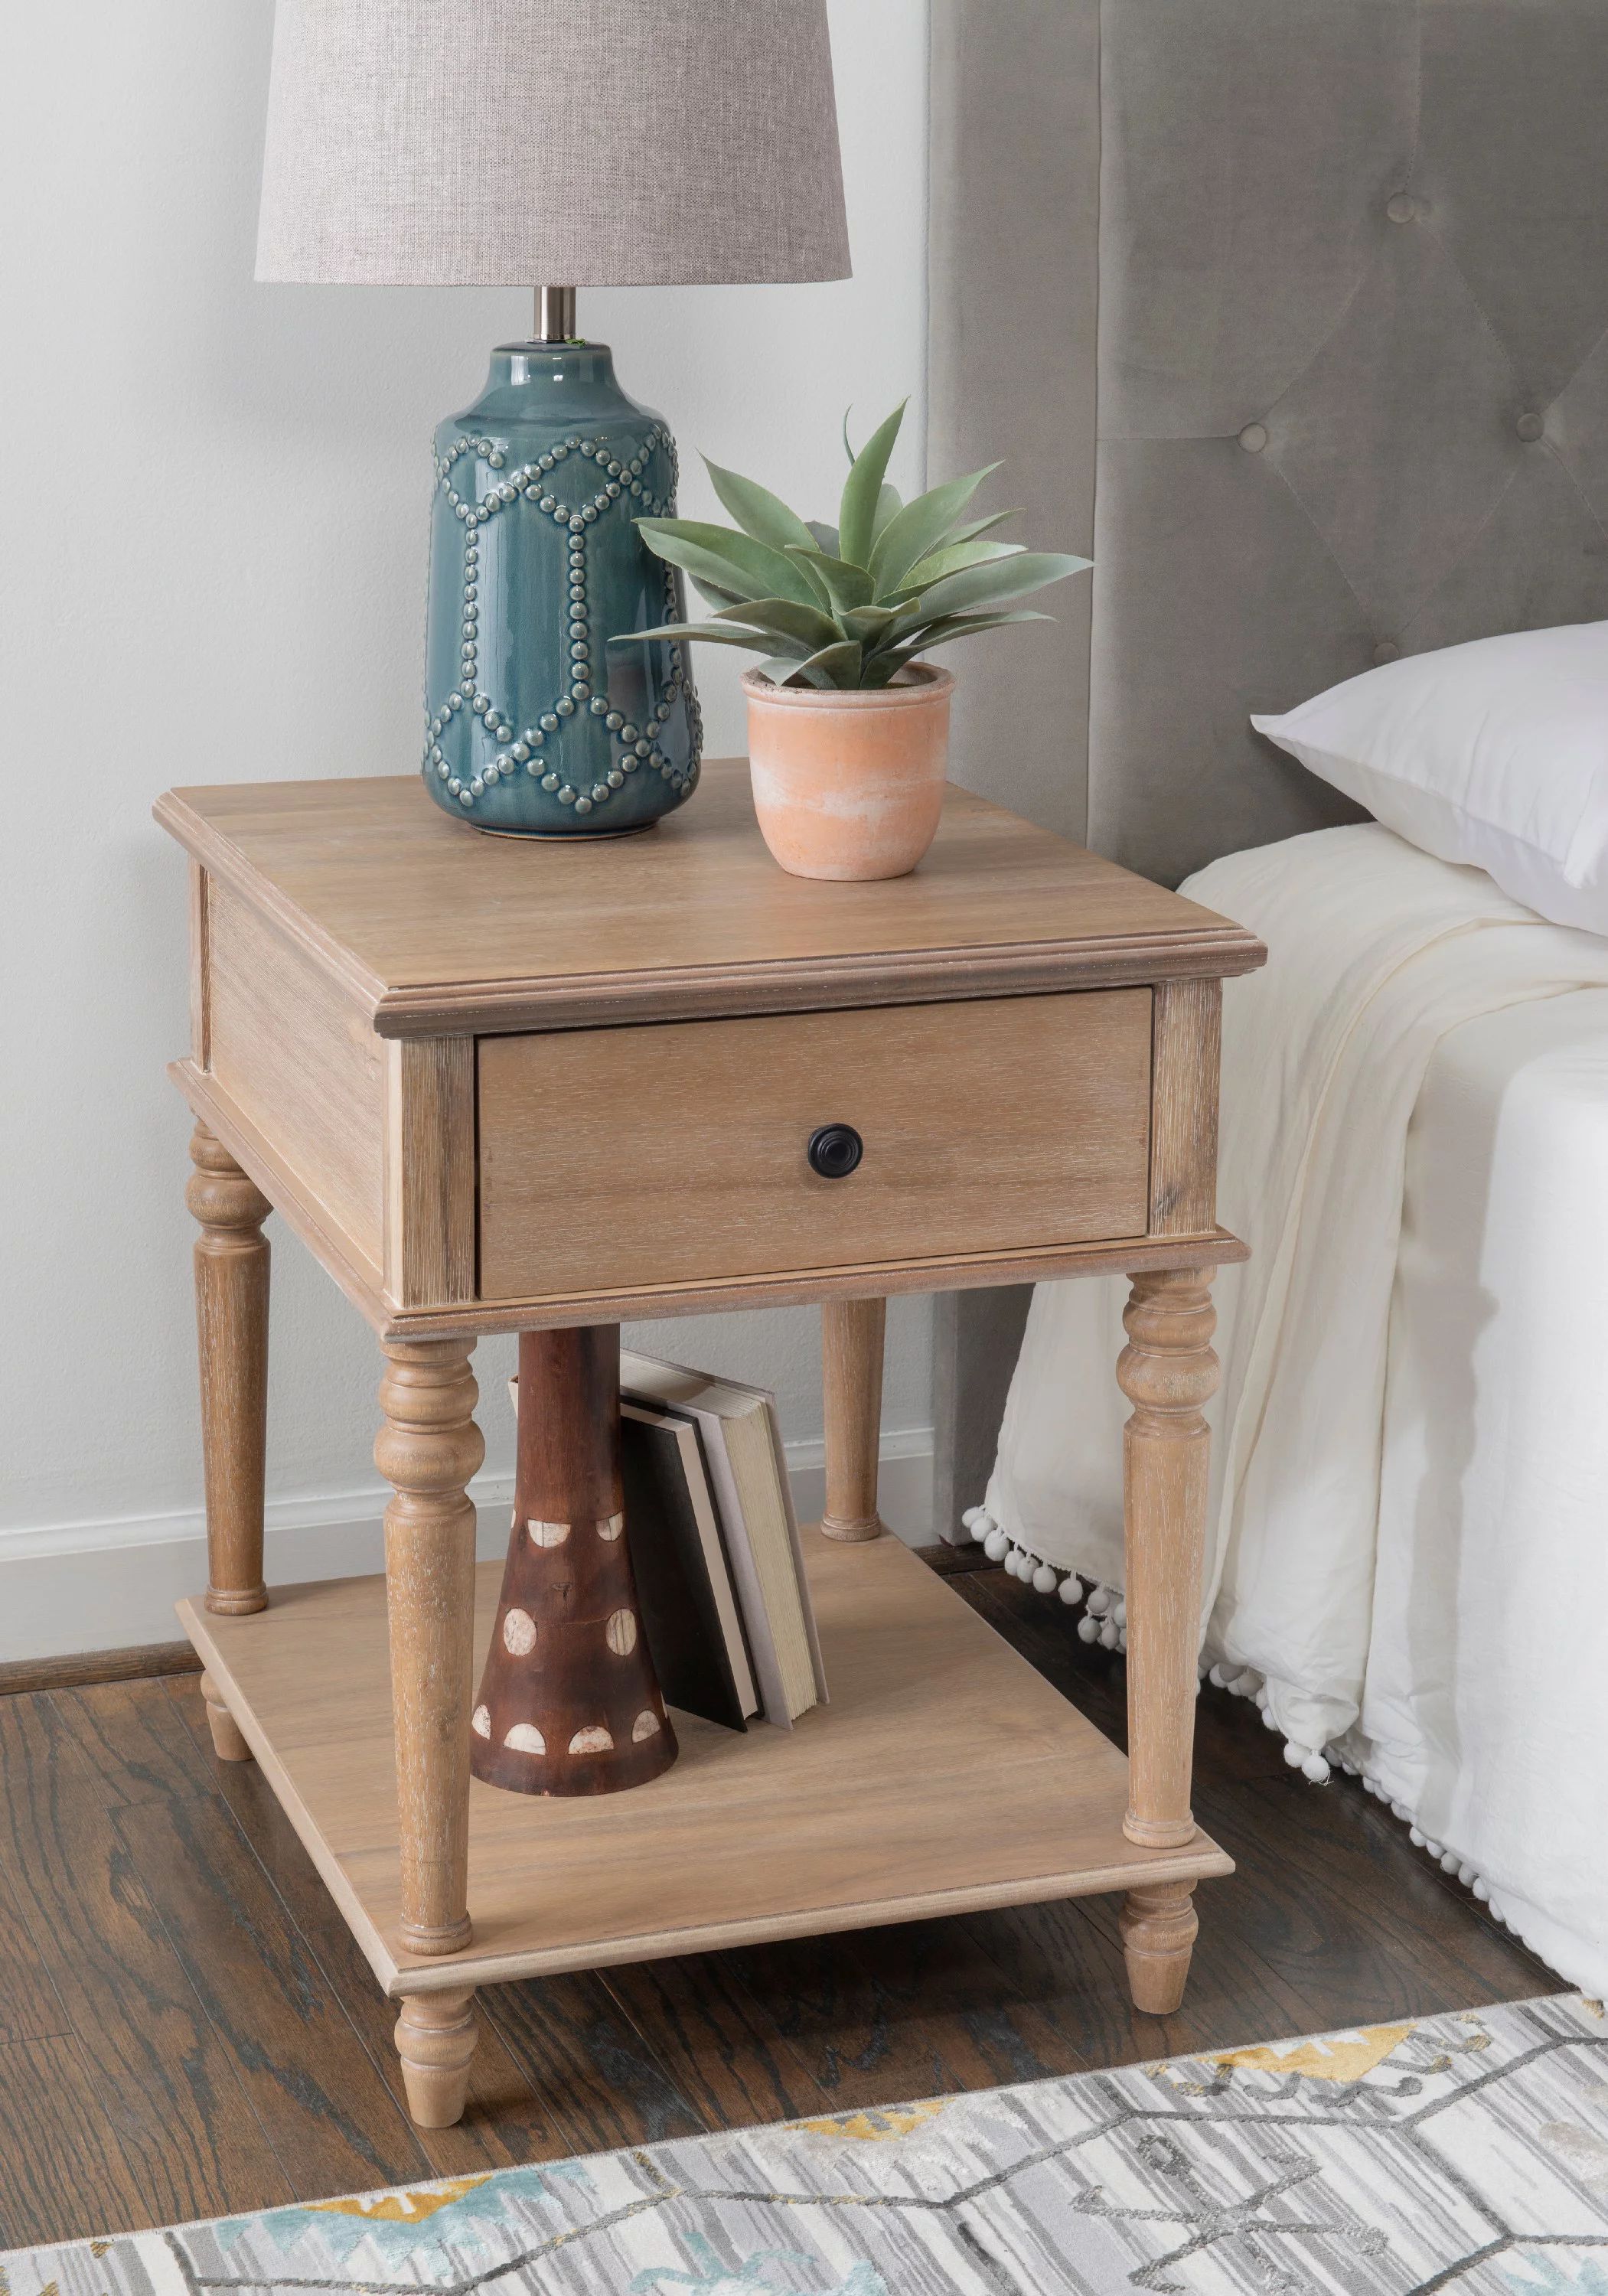 McGhie Single Drawer End Table with Shelf, Natural | Walmart (US)